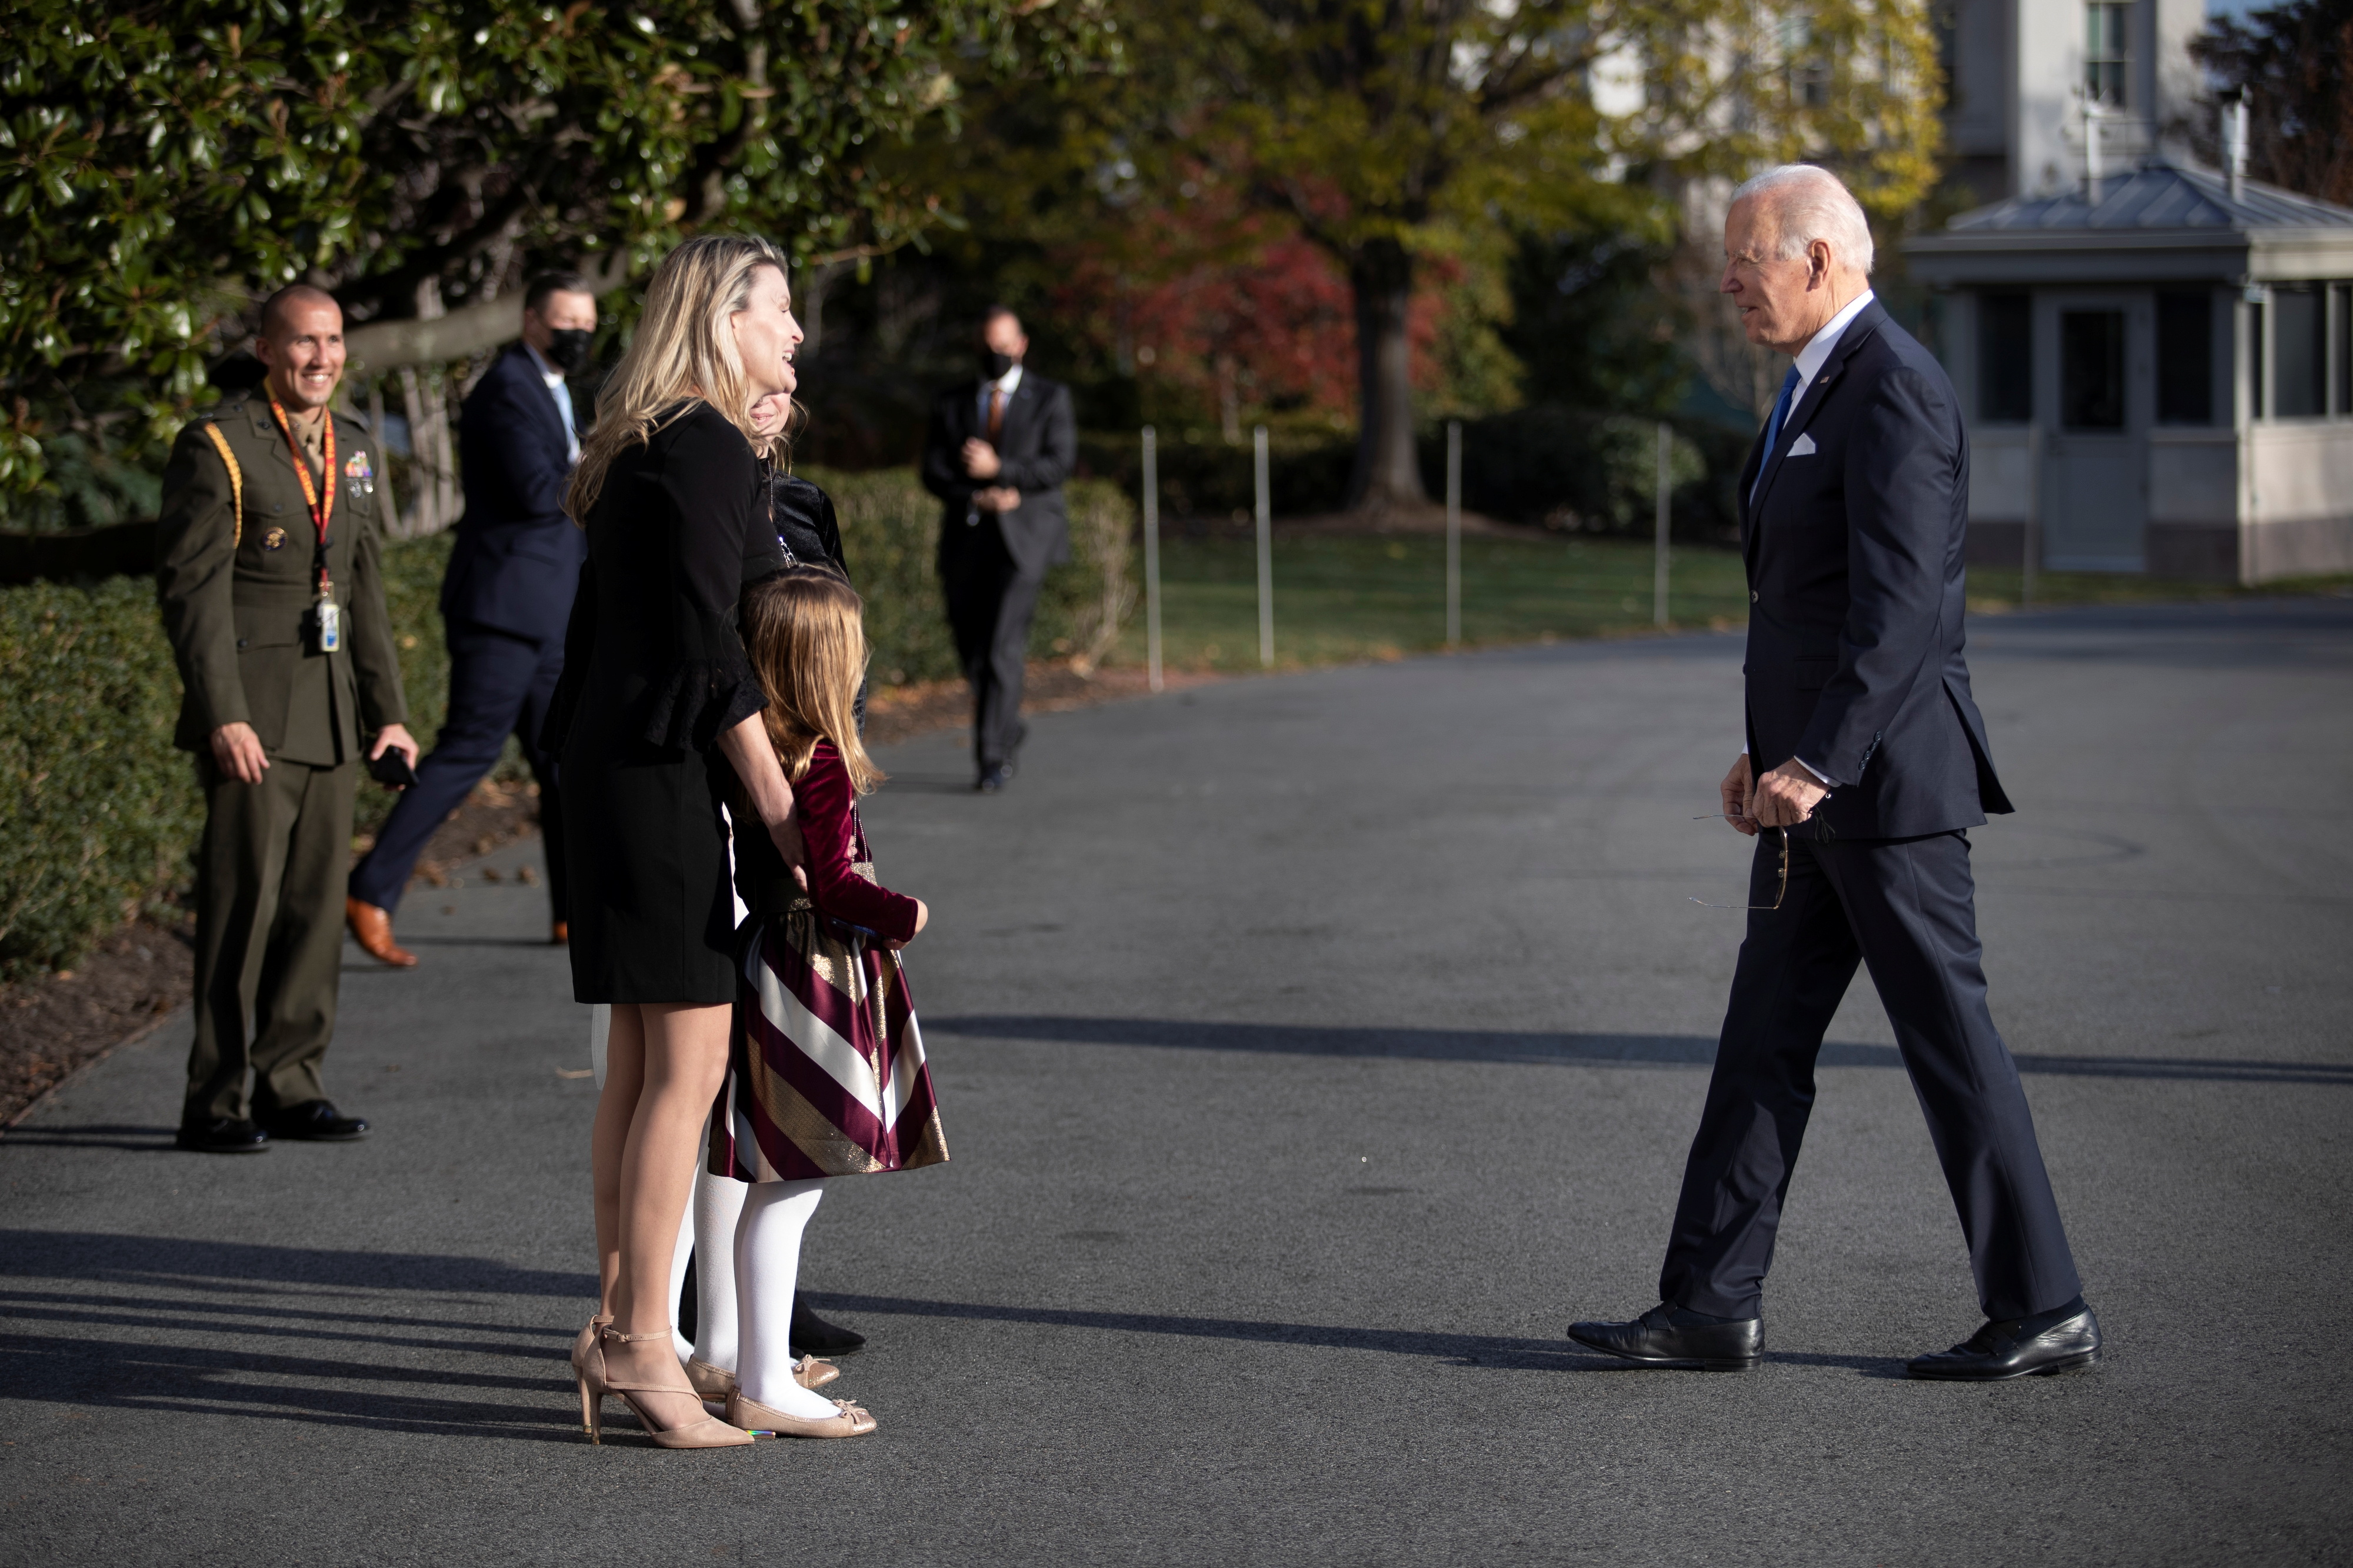 U.S. President Joe Biden greets the family of a HMX-1 Marine One pilot who was conducting his last flight in service, while walking to the Oval Office, at the South Lawn at the White House in Washington, U.S., December 2, 2021. REUTERS/Tom Brenner